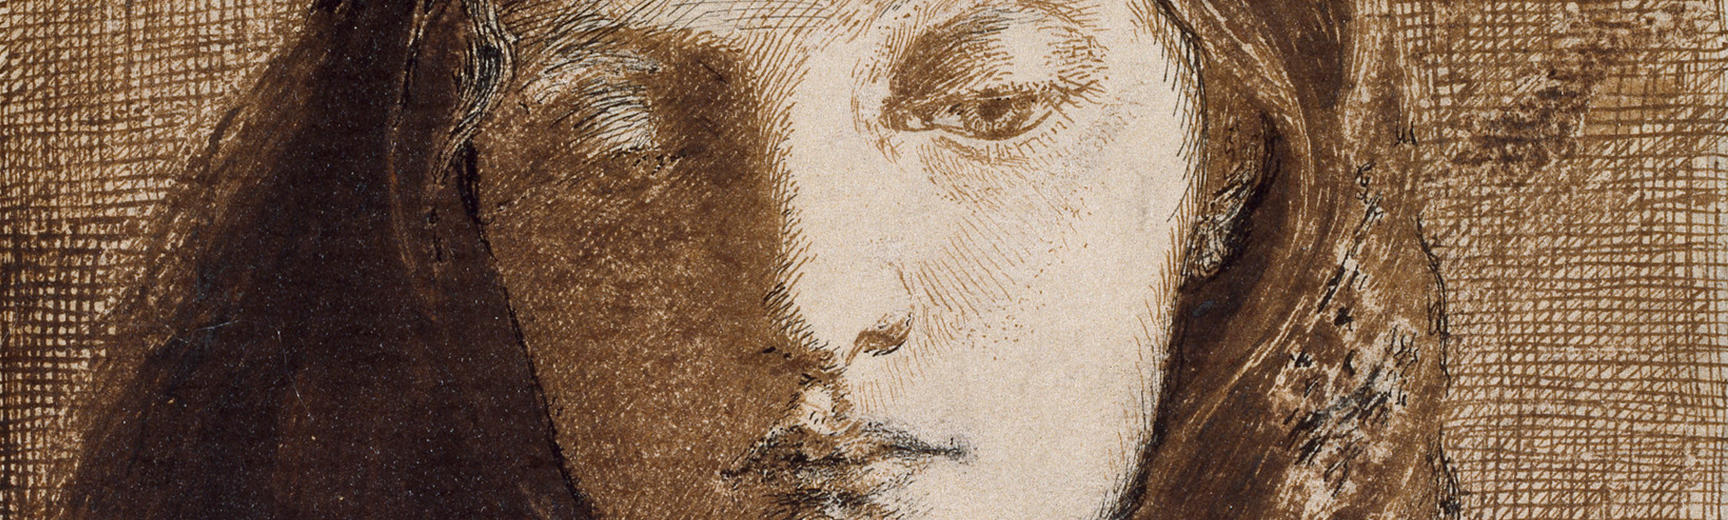 Lizzie Siddal portrait, drawing by Rossetti in Pre-Raphaelites exhibition